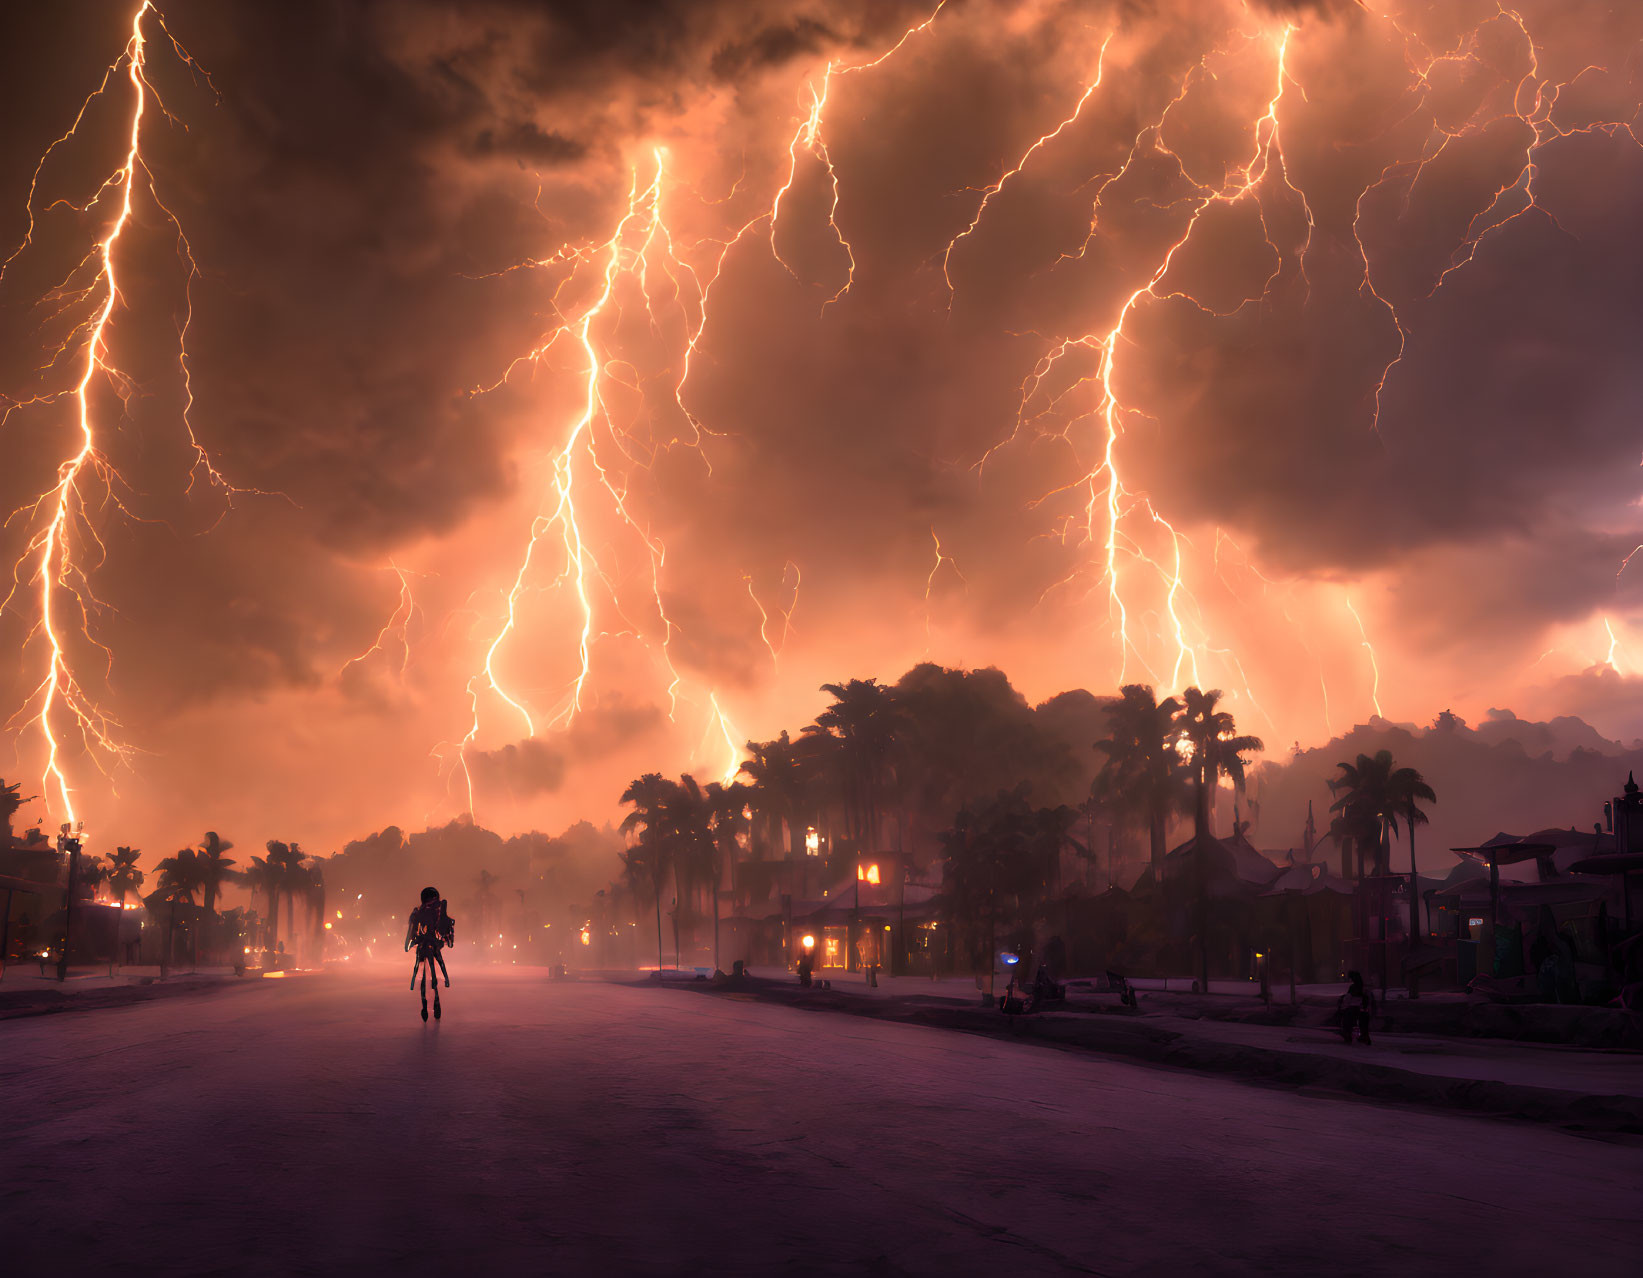 Cyclist on street at dusk with lightning strikes and palm tree silhouettes